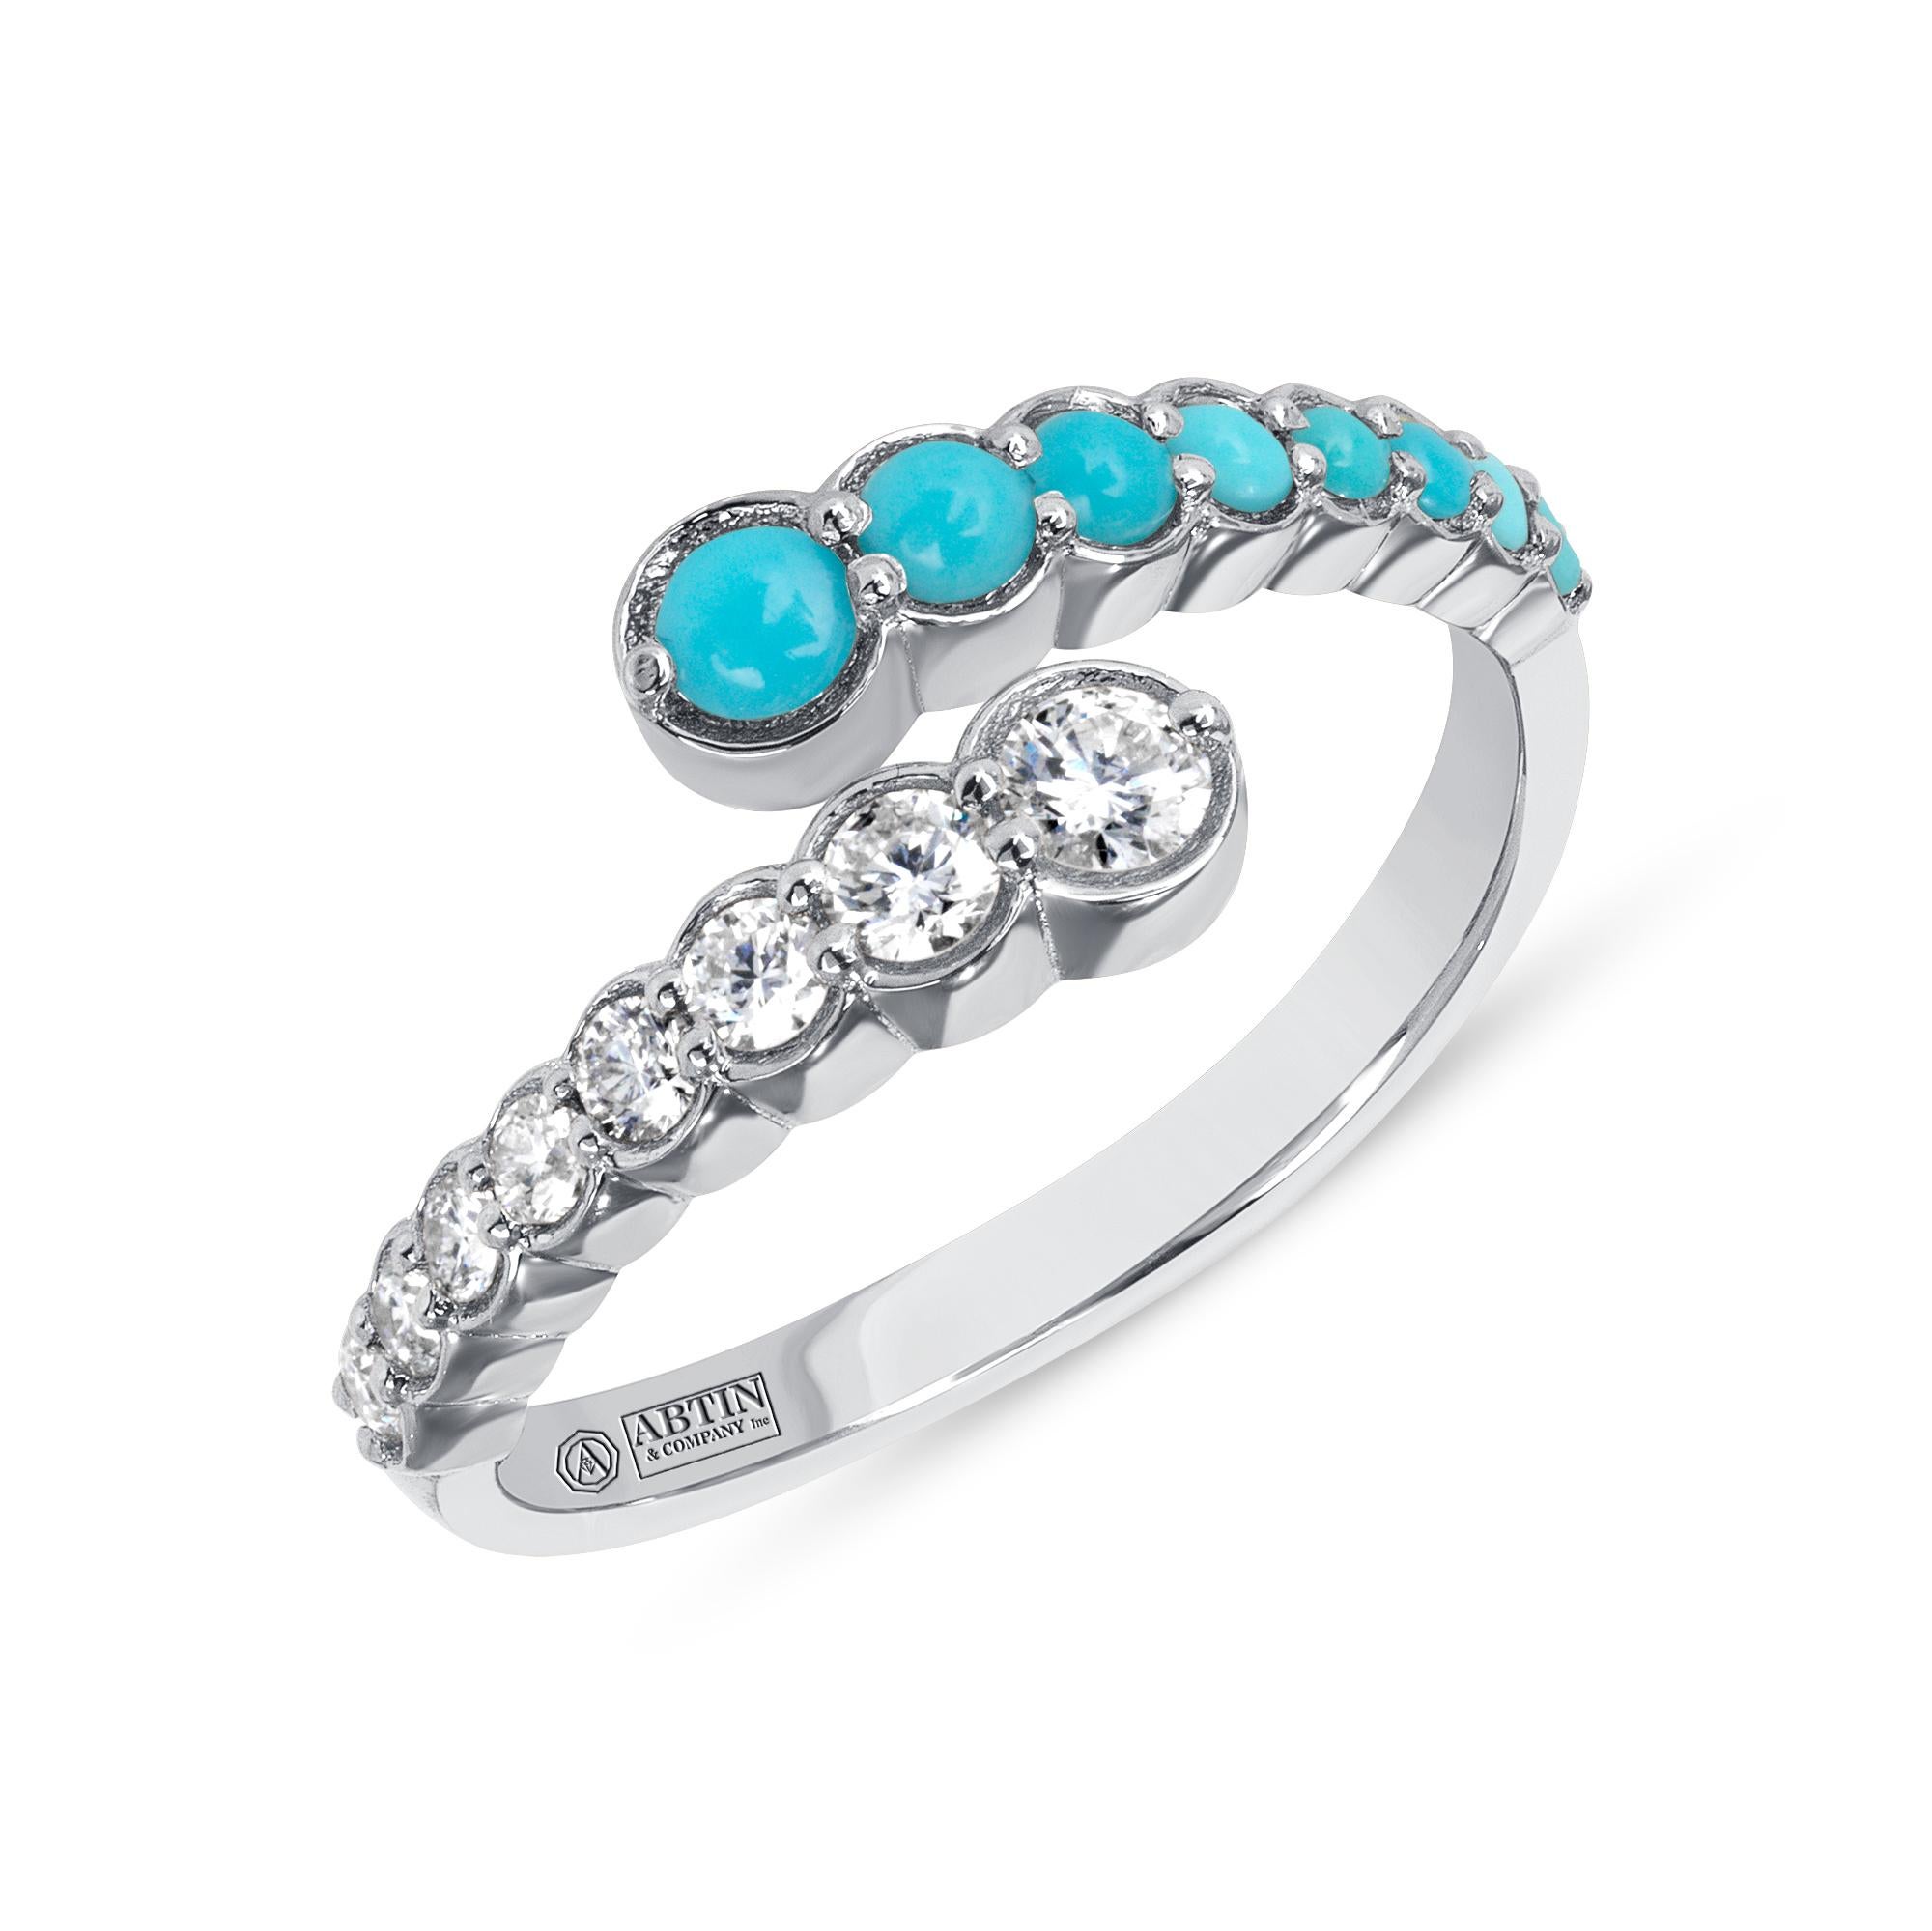 Crafted in 14K gold this ring features clean and contemporary lines. This modern and stylish open bypass ring is set with mesmerizing round-cut 
diamonds and genuine Turquoise. Stack it with your stacking rings or wear it solo to elevate any